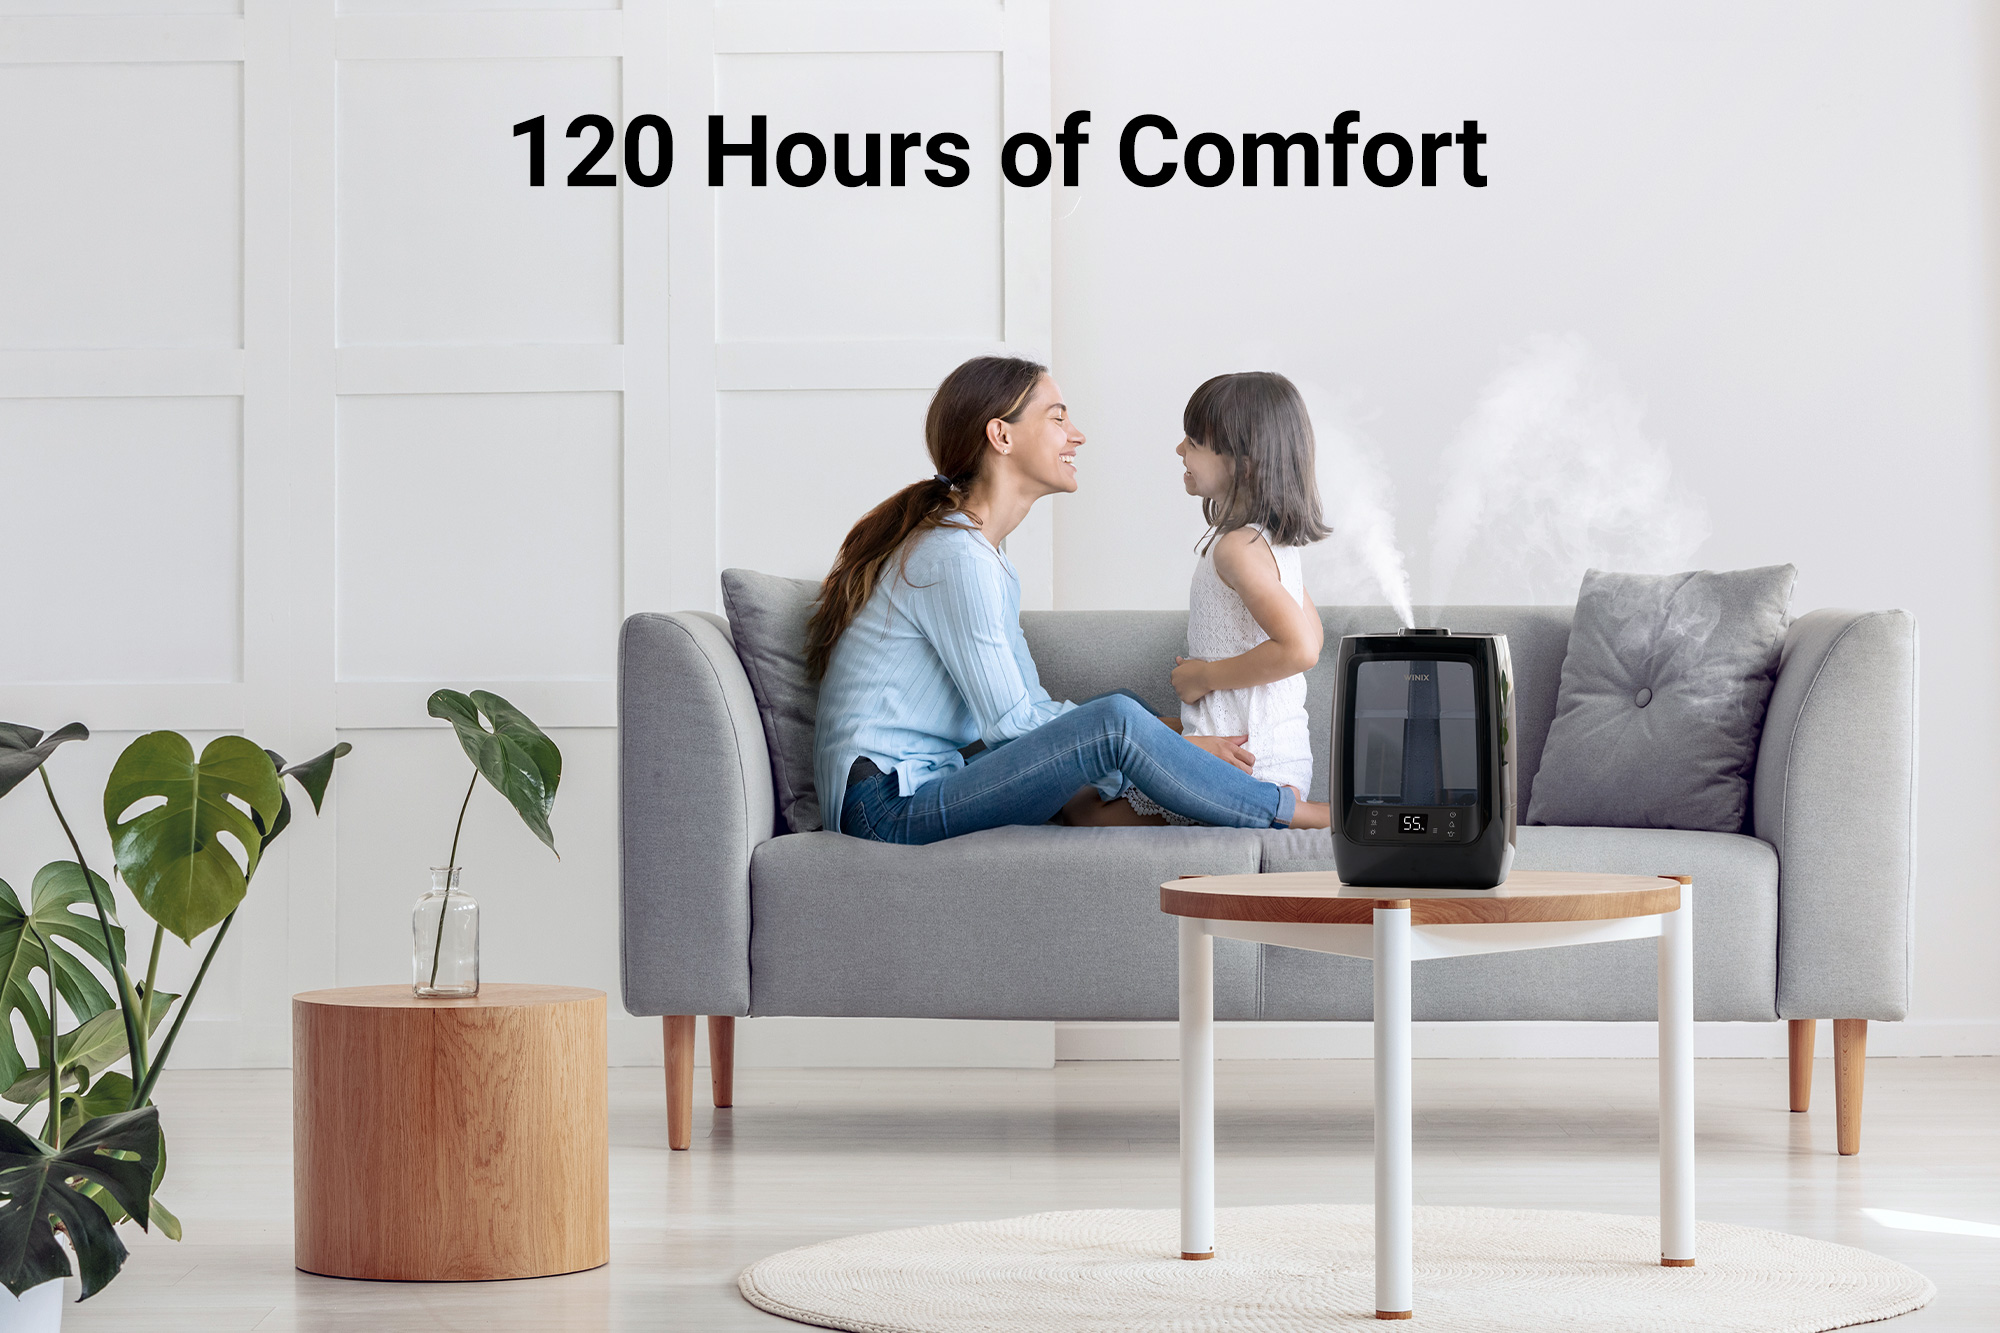 L200 Humidifier on side table next to woman and young child sitting on a couch and text saying 120 hours of comfort